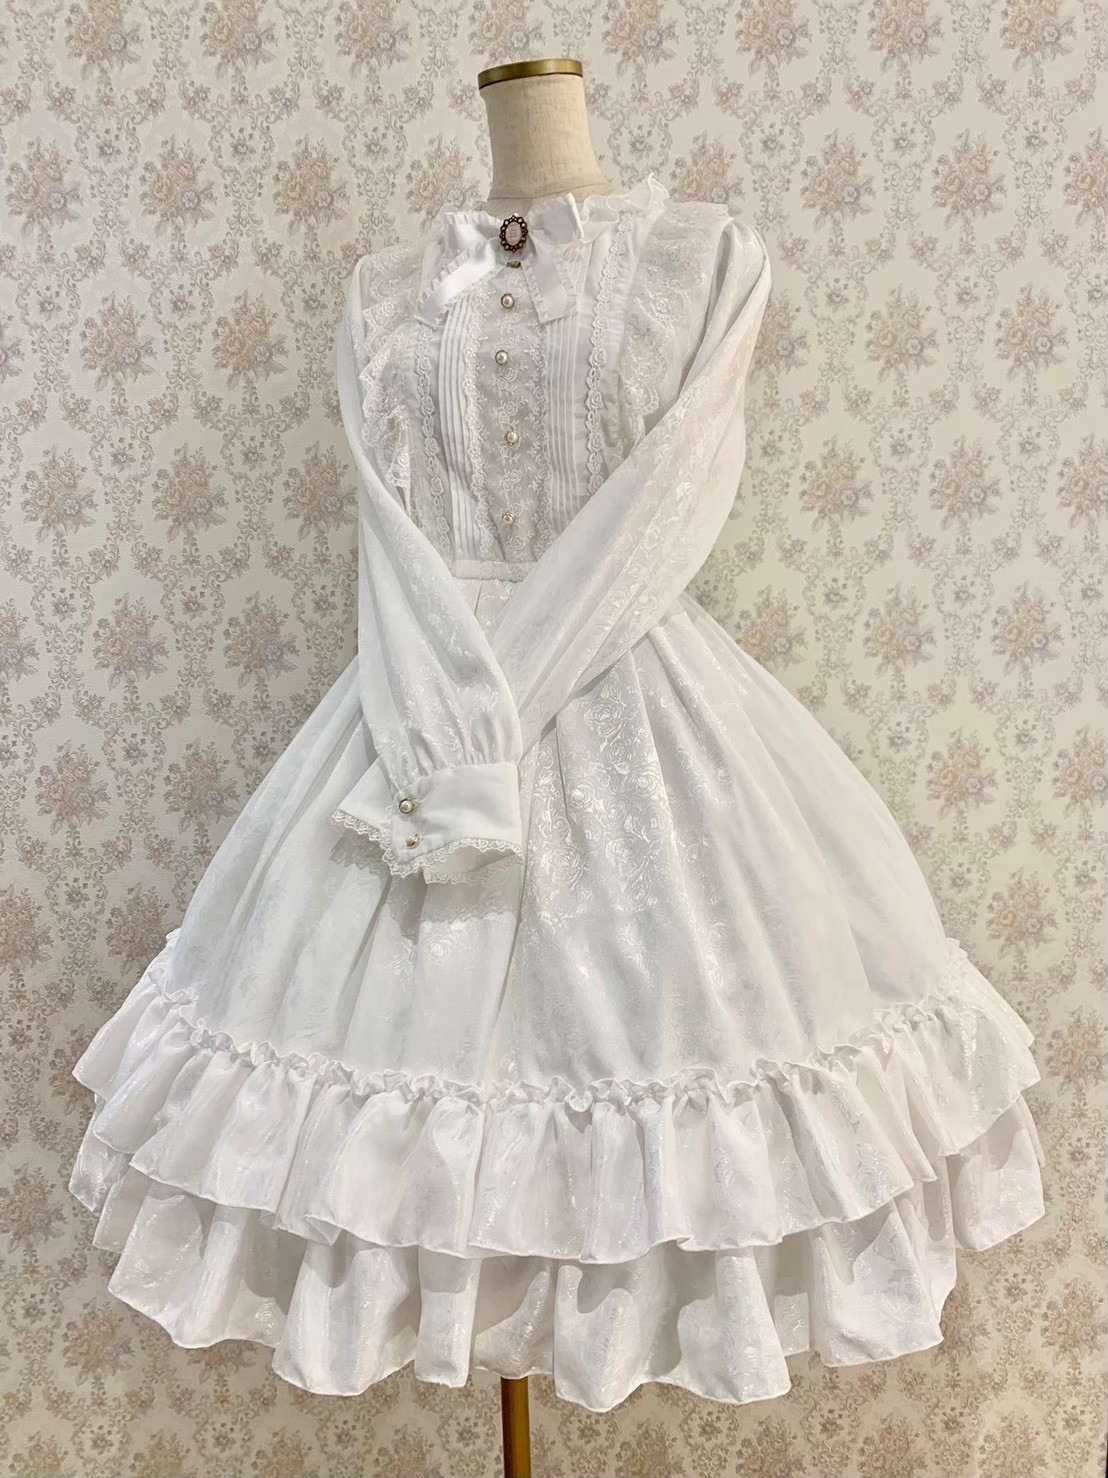 ATELIER PIERROT on X: "️Pina sweet collection 入荷情報️ 本日